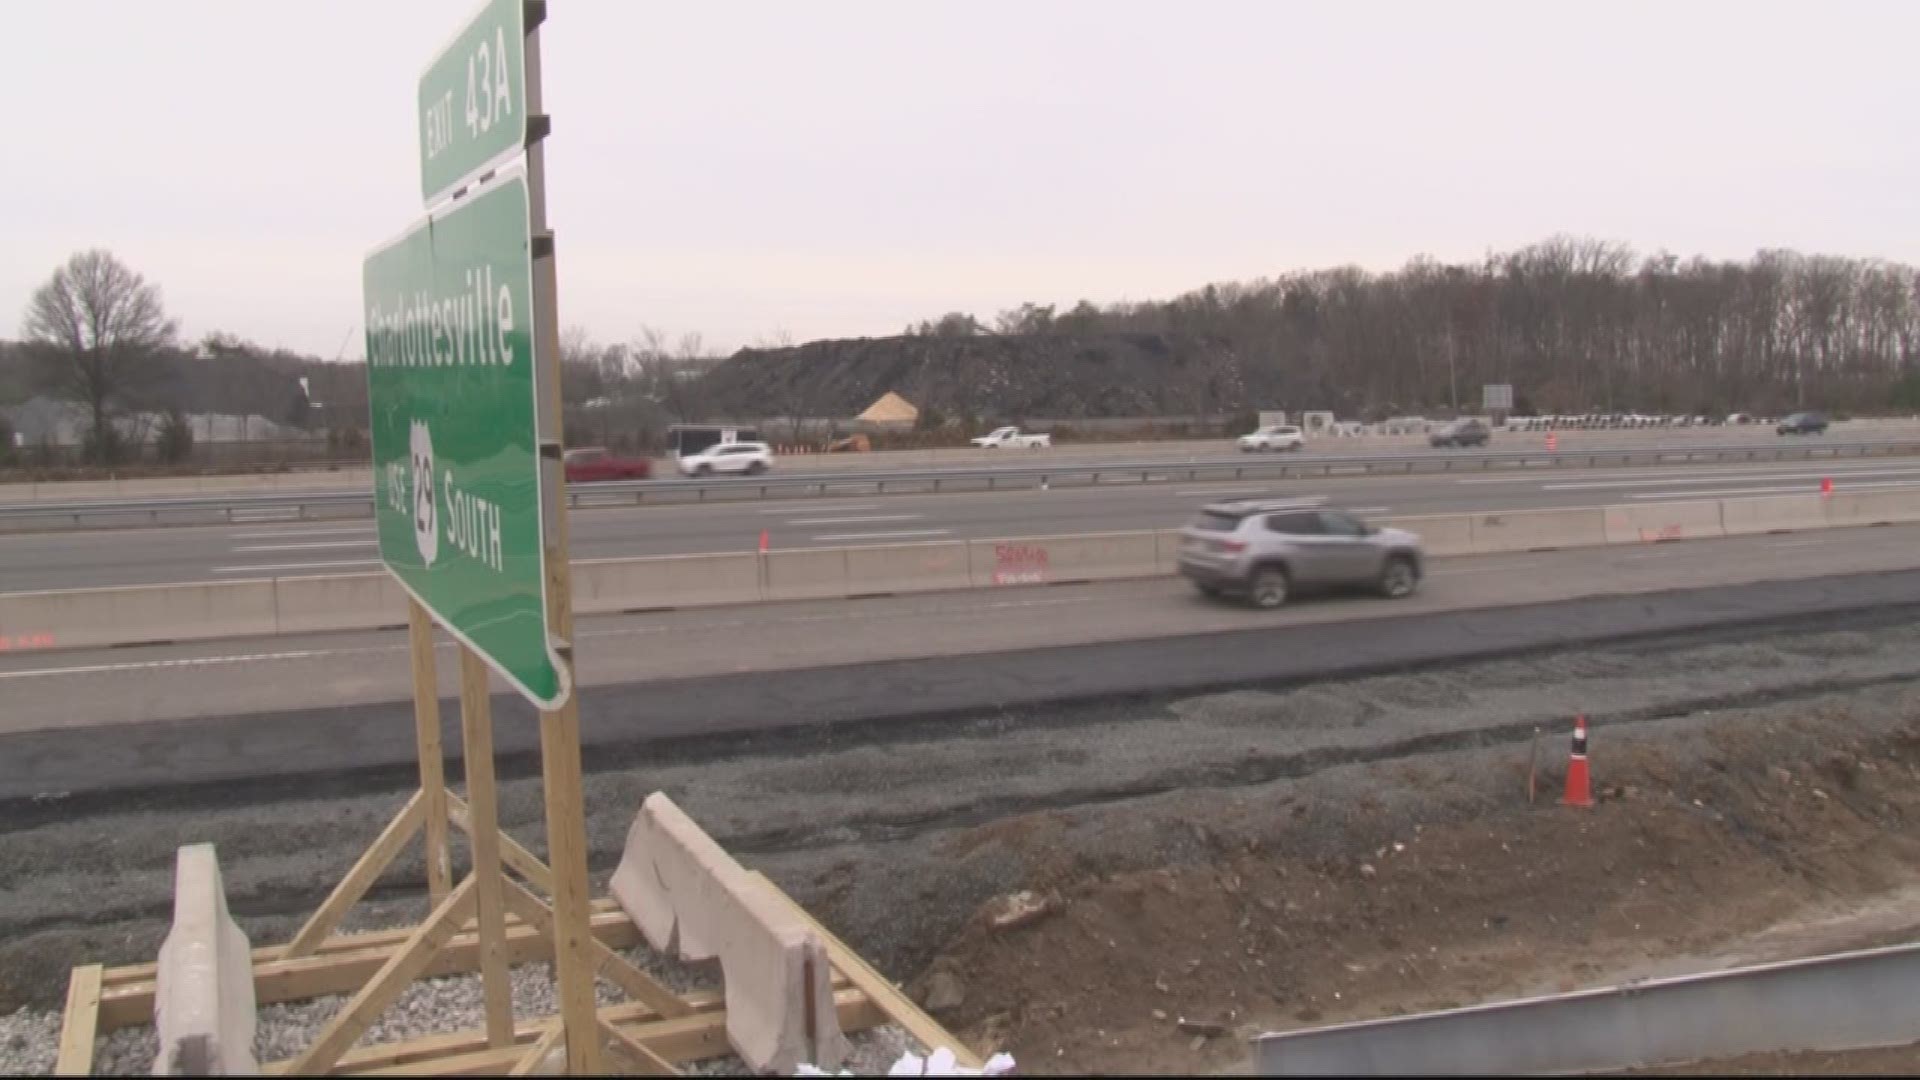 Traffic is projected to get worse on Interstate 66 in Northern Virginia for over 200,000 drivers that travel it each weekday.